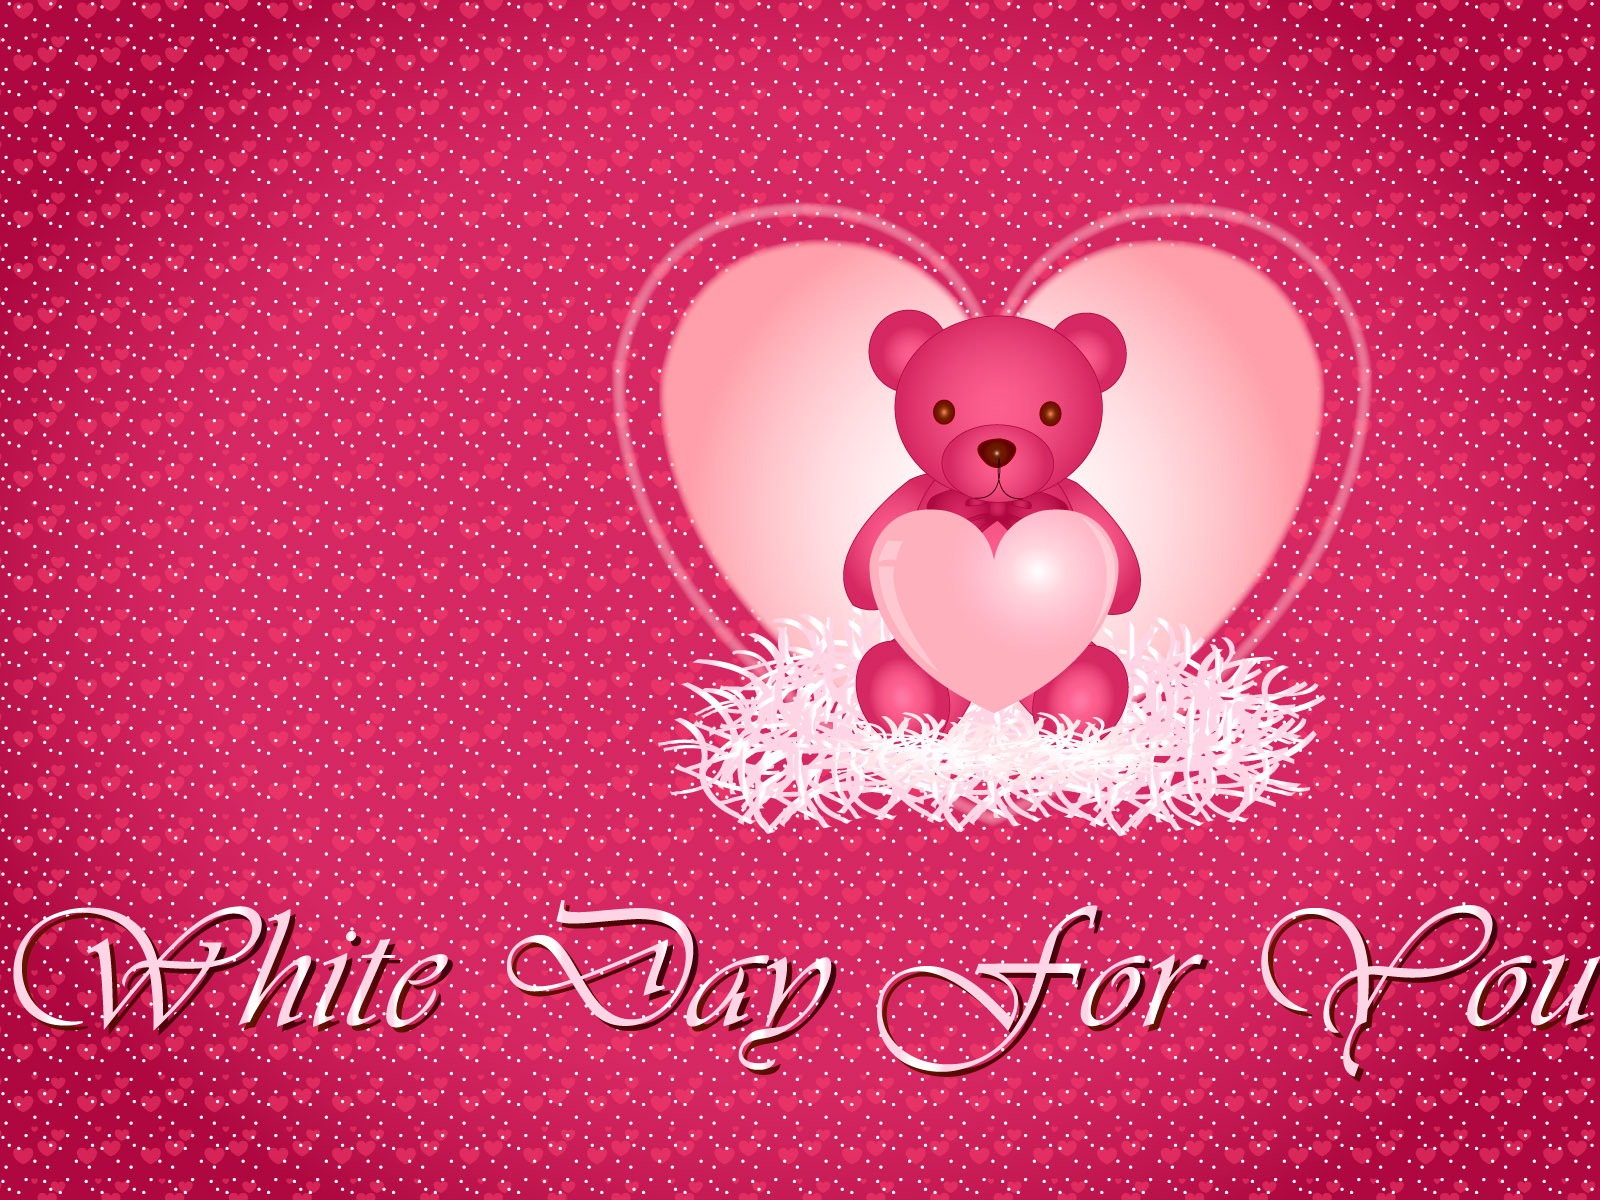 Valentine's Day Theme Wallpapers (2) #2 - 1600x1200